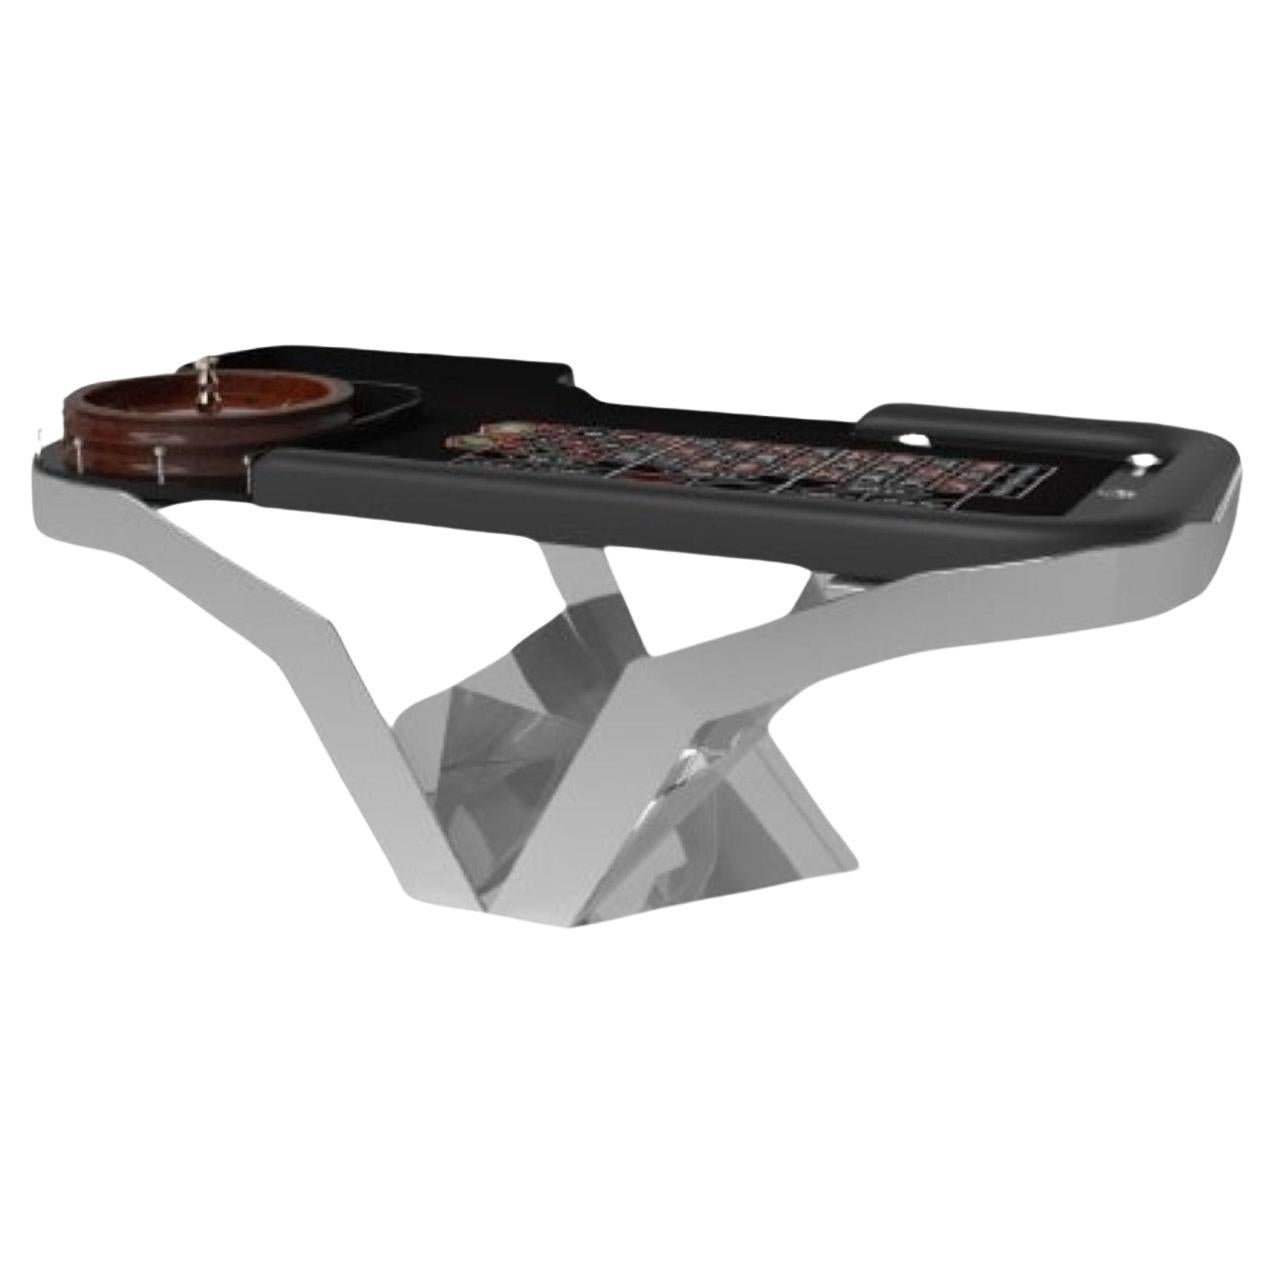 Elevate Customs Enzo Roulette Tables / Stainless Steel Sheet Metal in 8'2" - USA For Sale